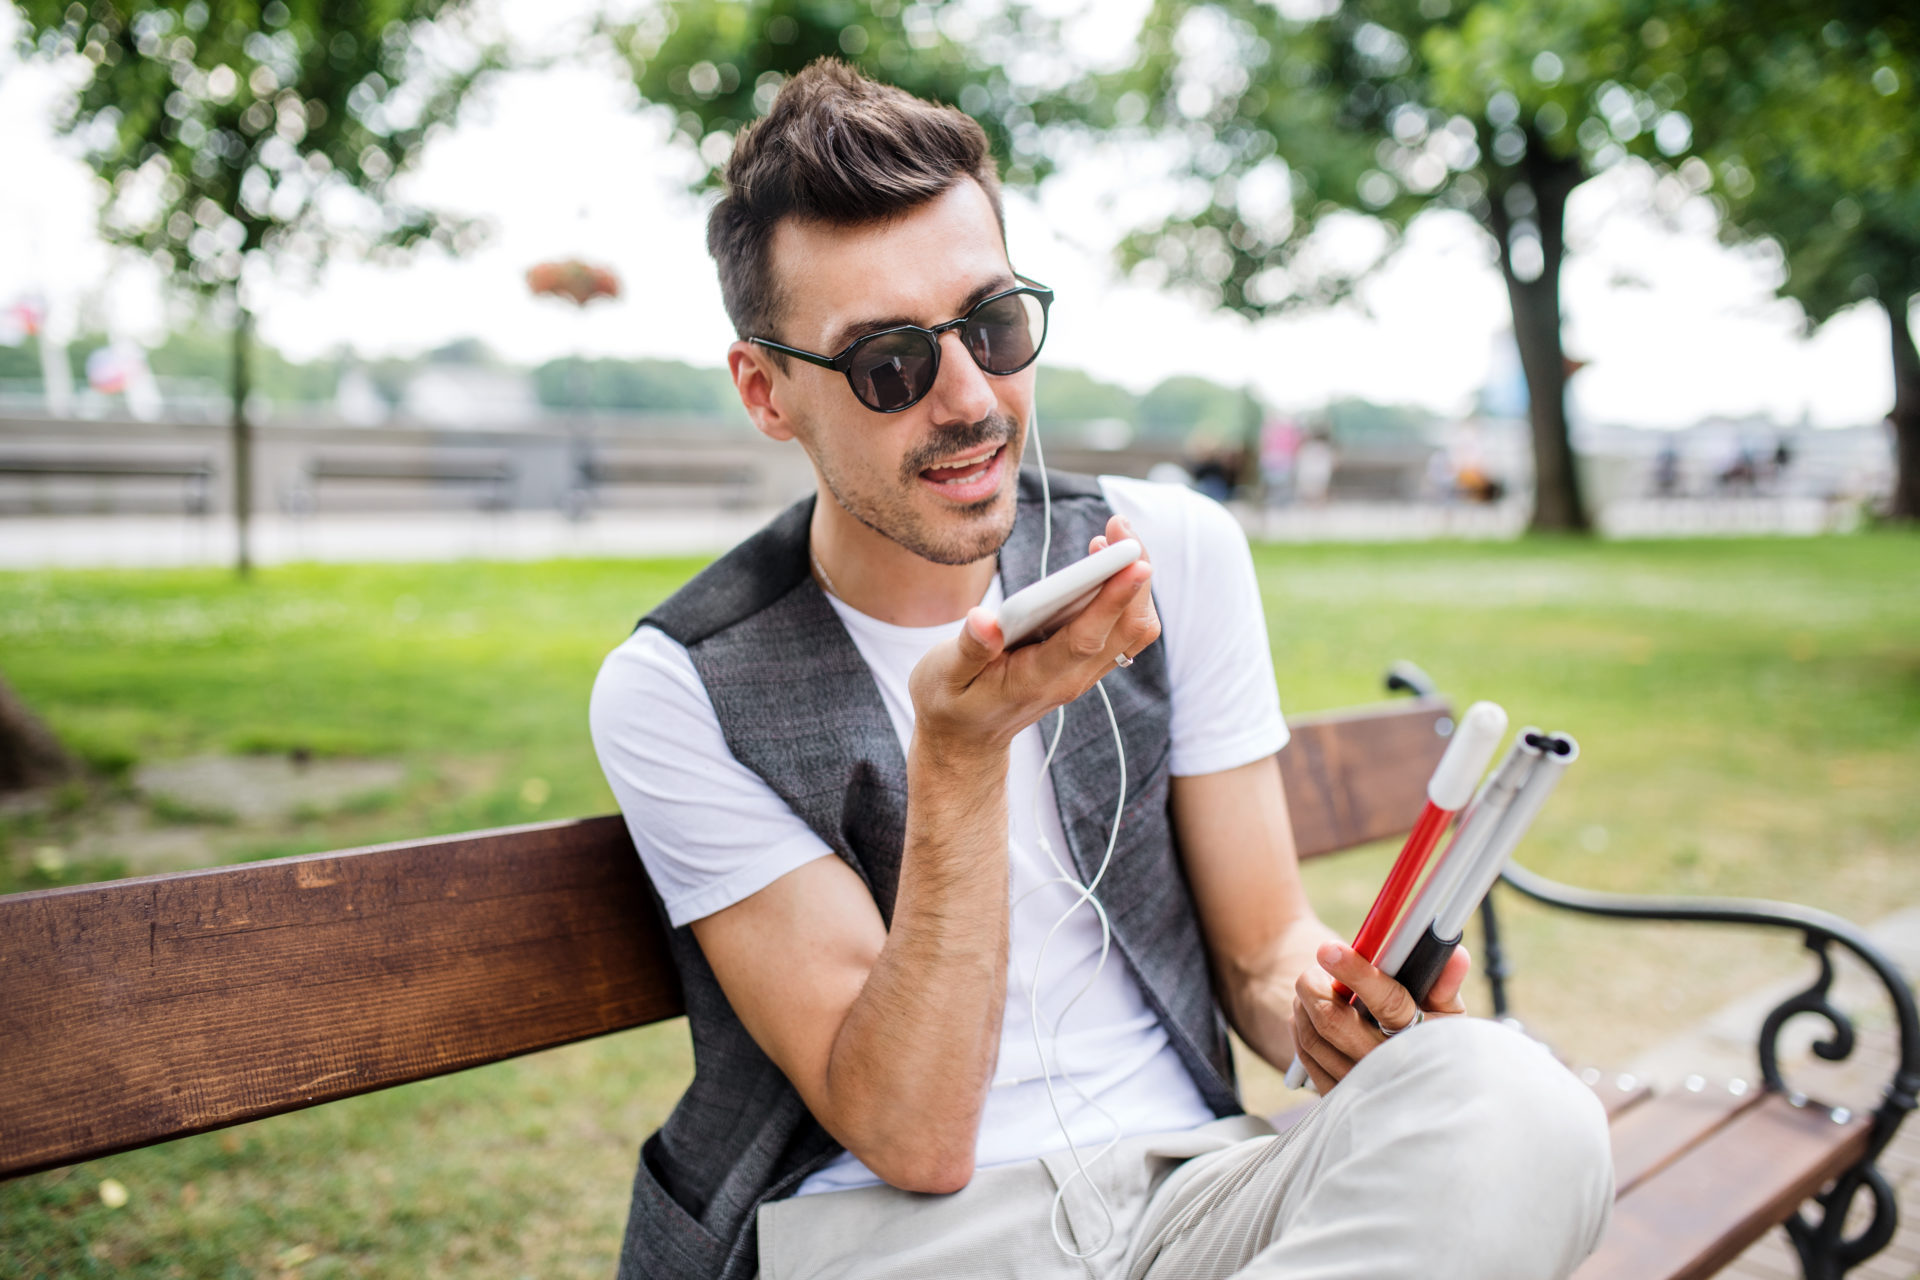 Man talking on mobile phone with earphones wearing sunglasses and a grey waistcoat on a bench outside